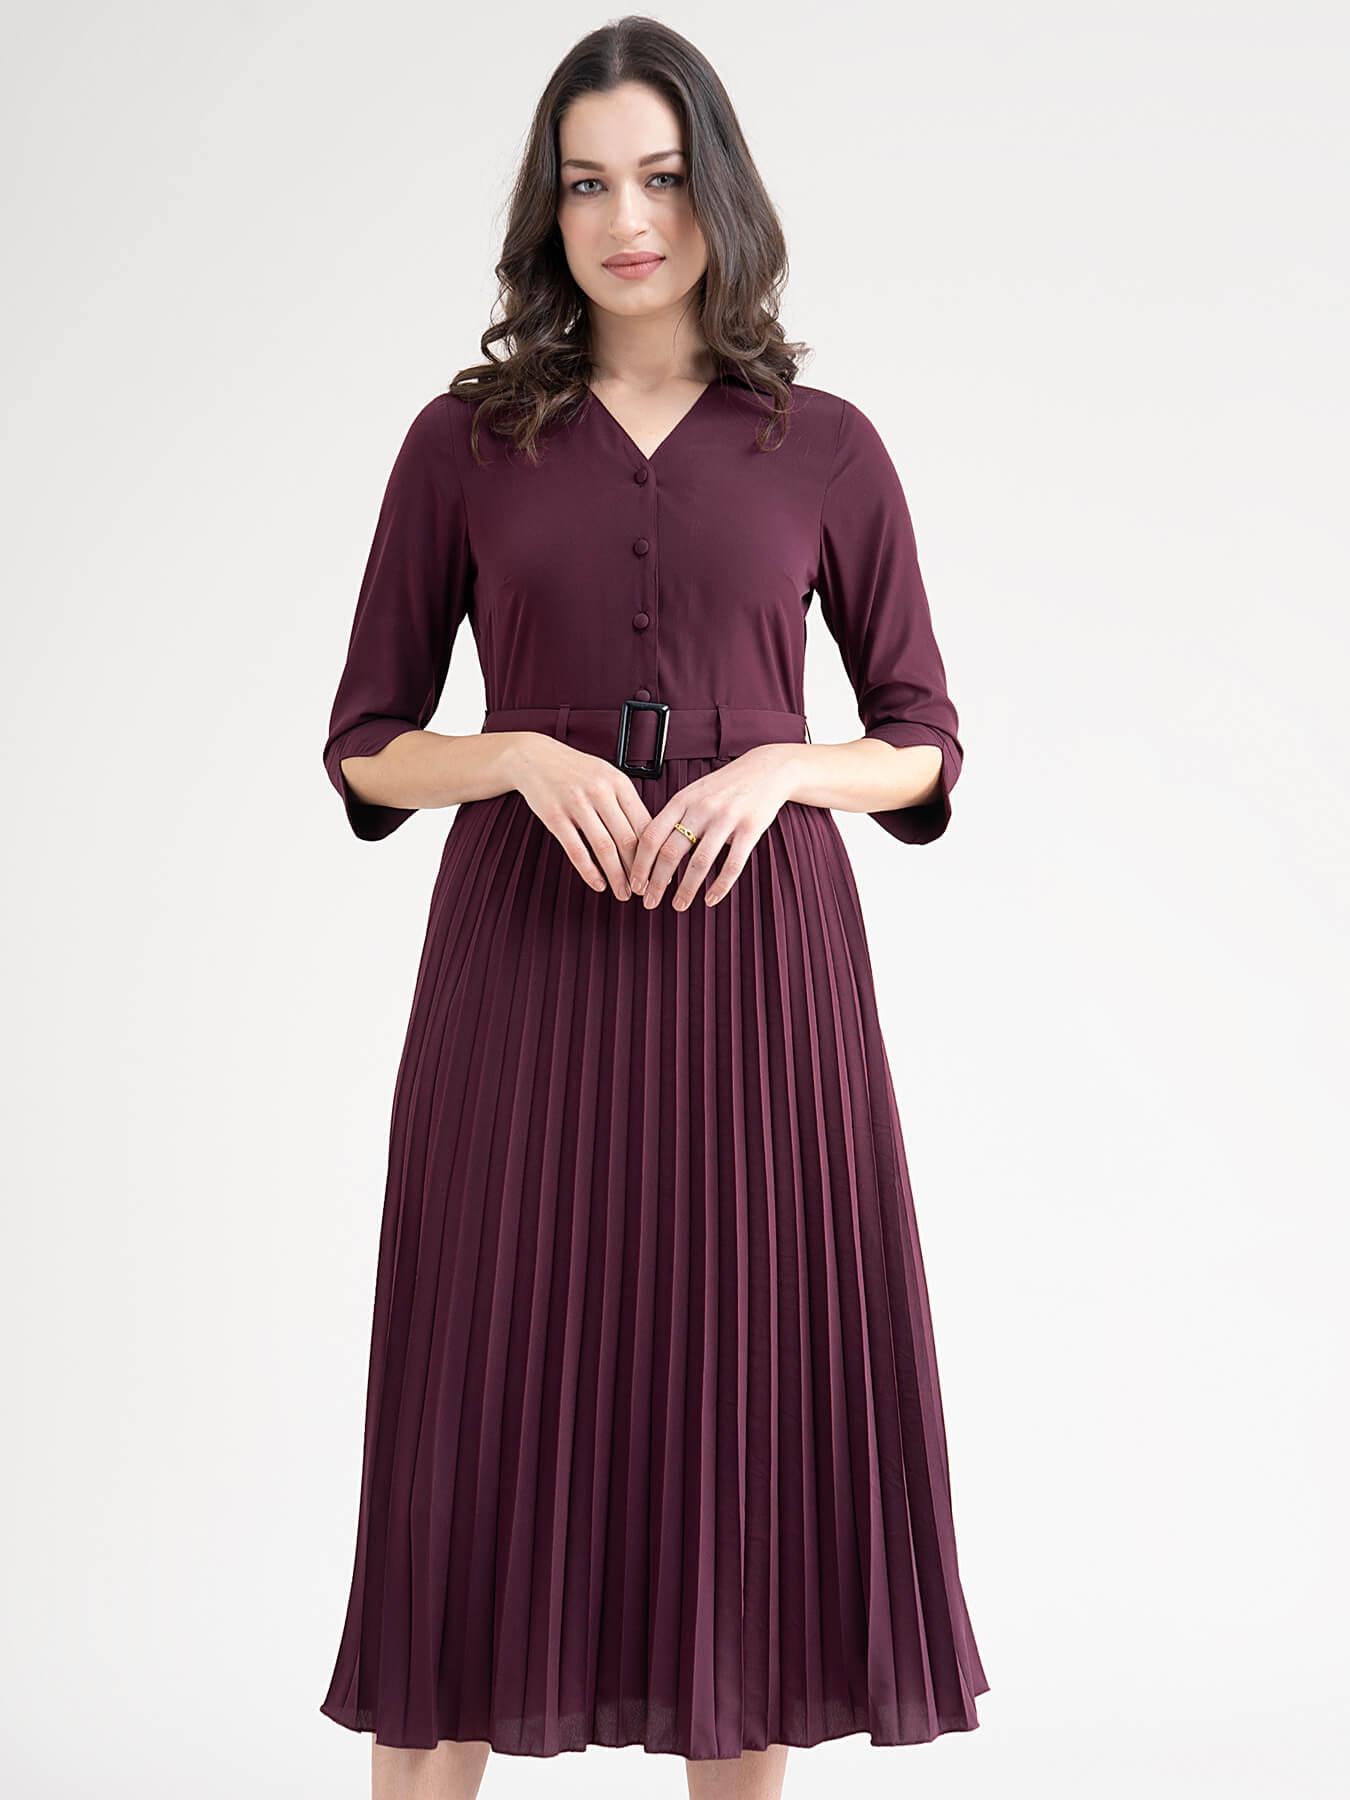 Collared A Line Pleated Dress - Maroon| Formal Dresses